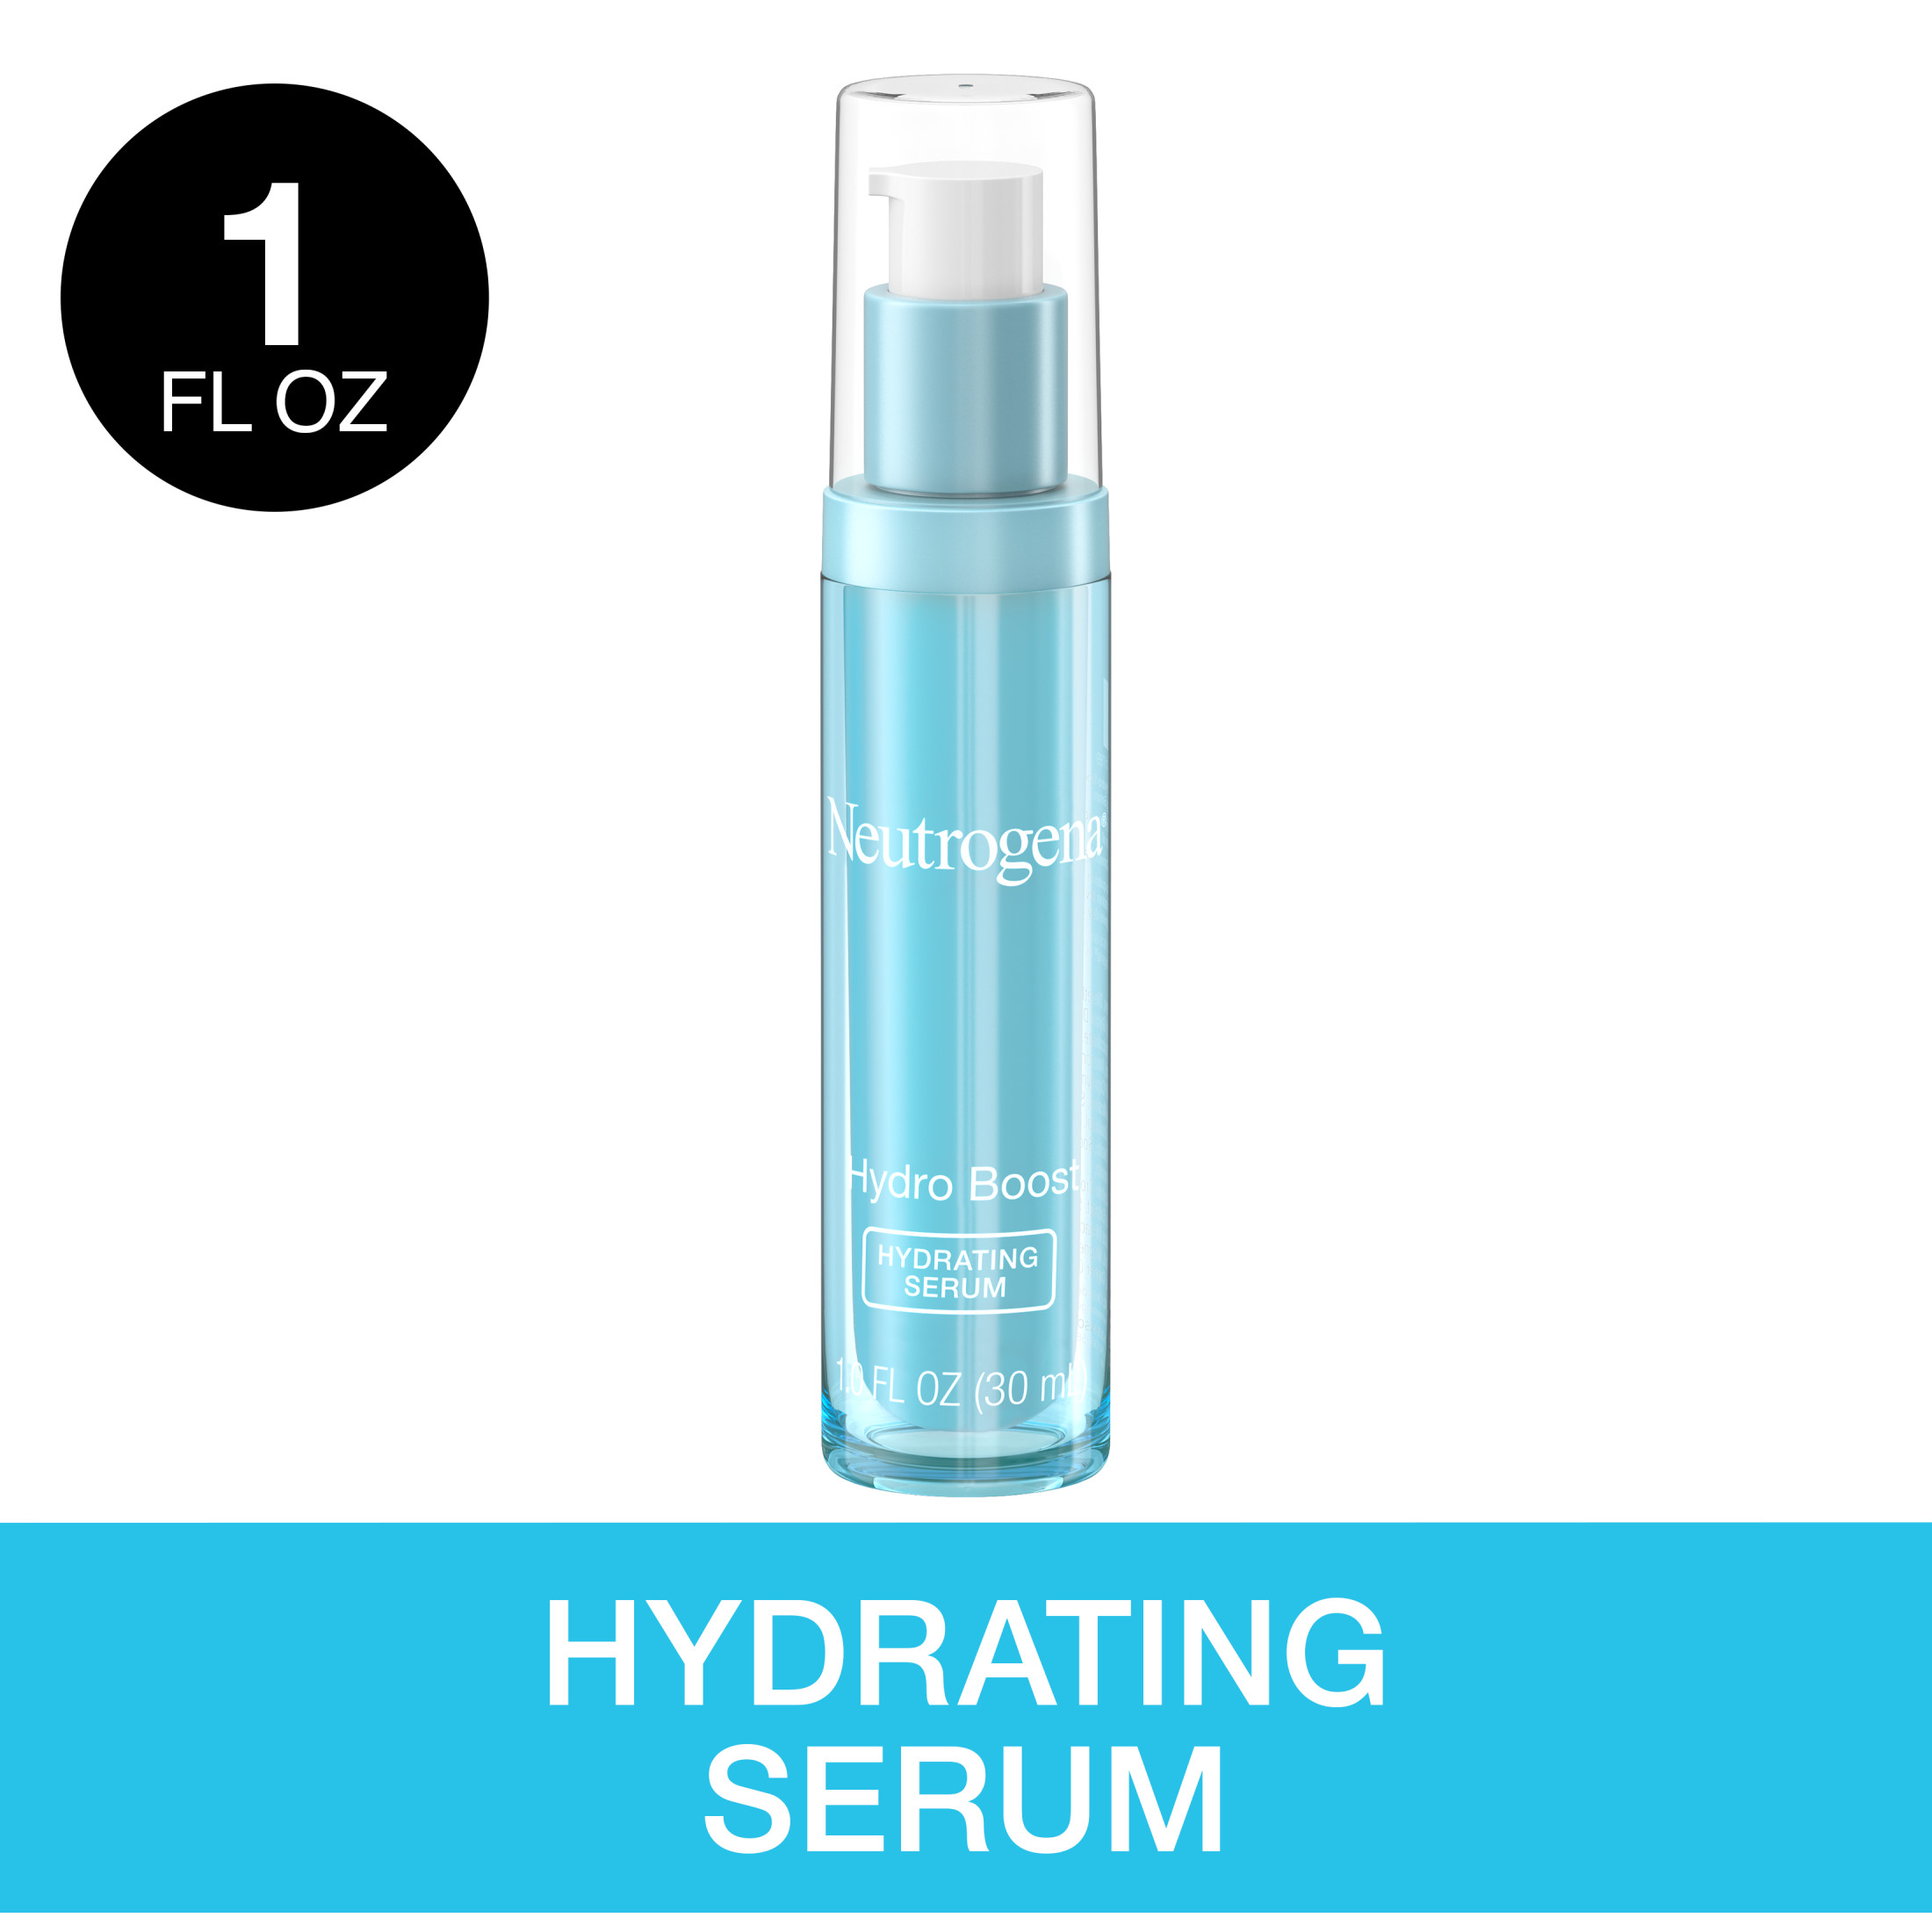 Neutrogena Hydro Boost Hydrating Face Serum with Hyaluronic Acid, 1 oz - image 1 of 9